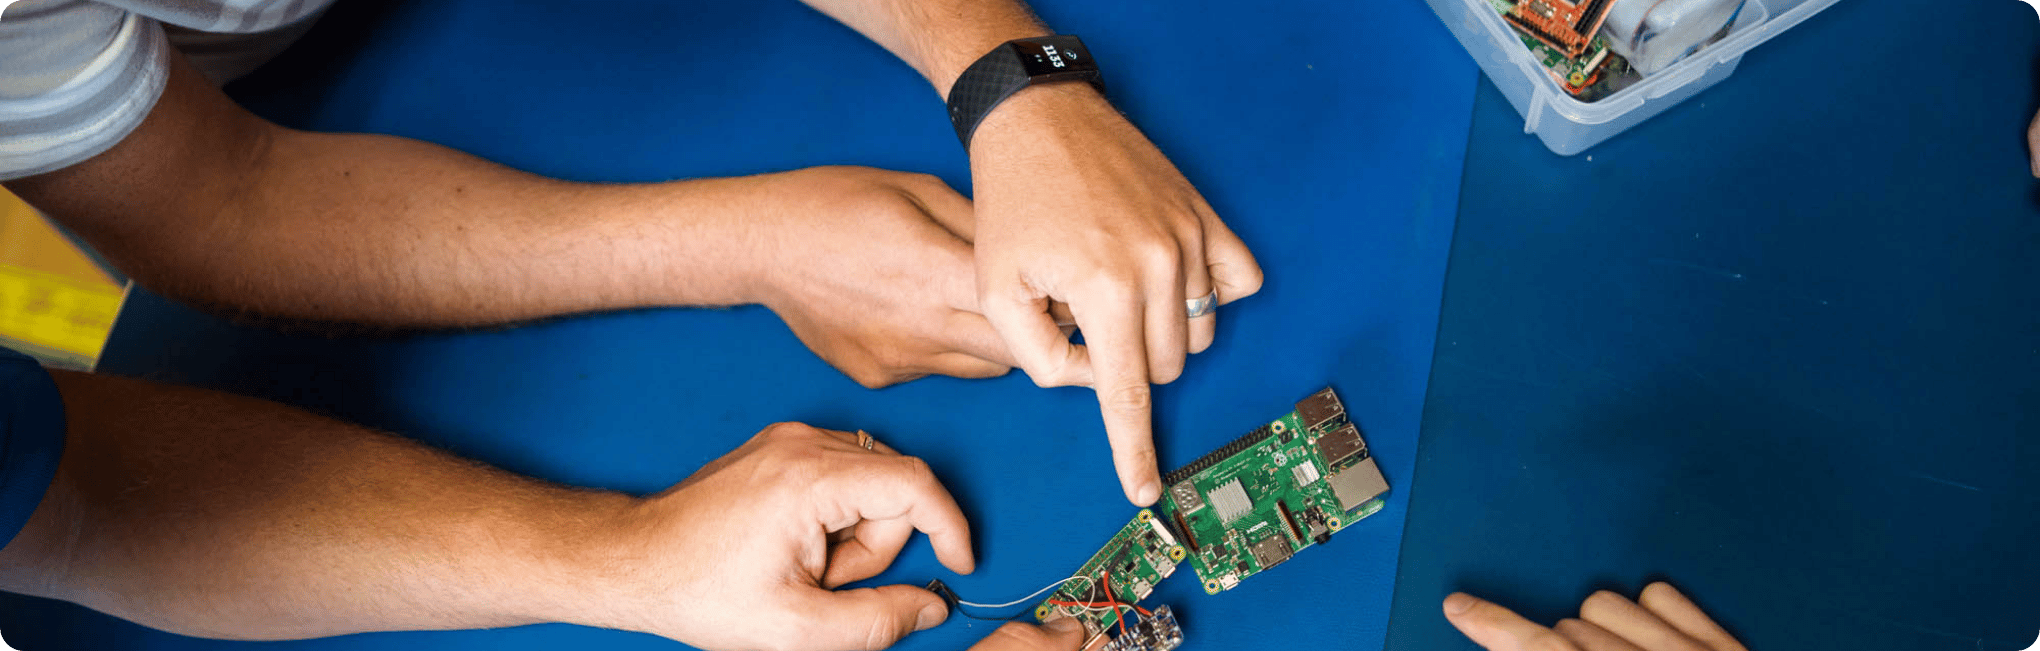 Engineers pointing at a PCB board